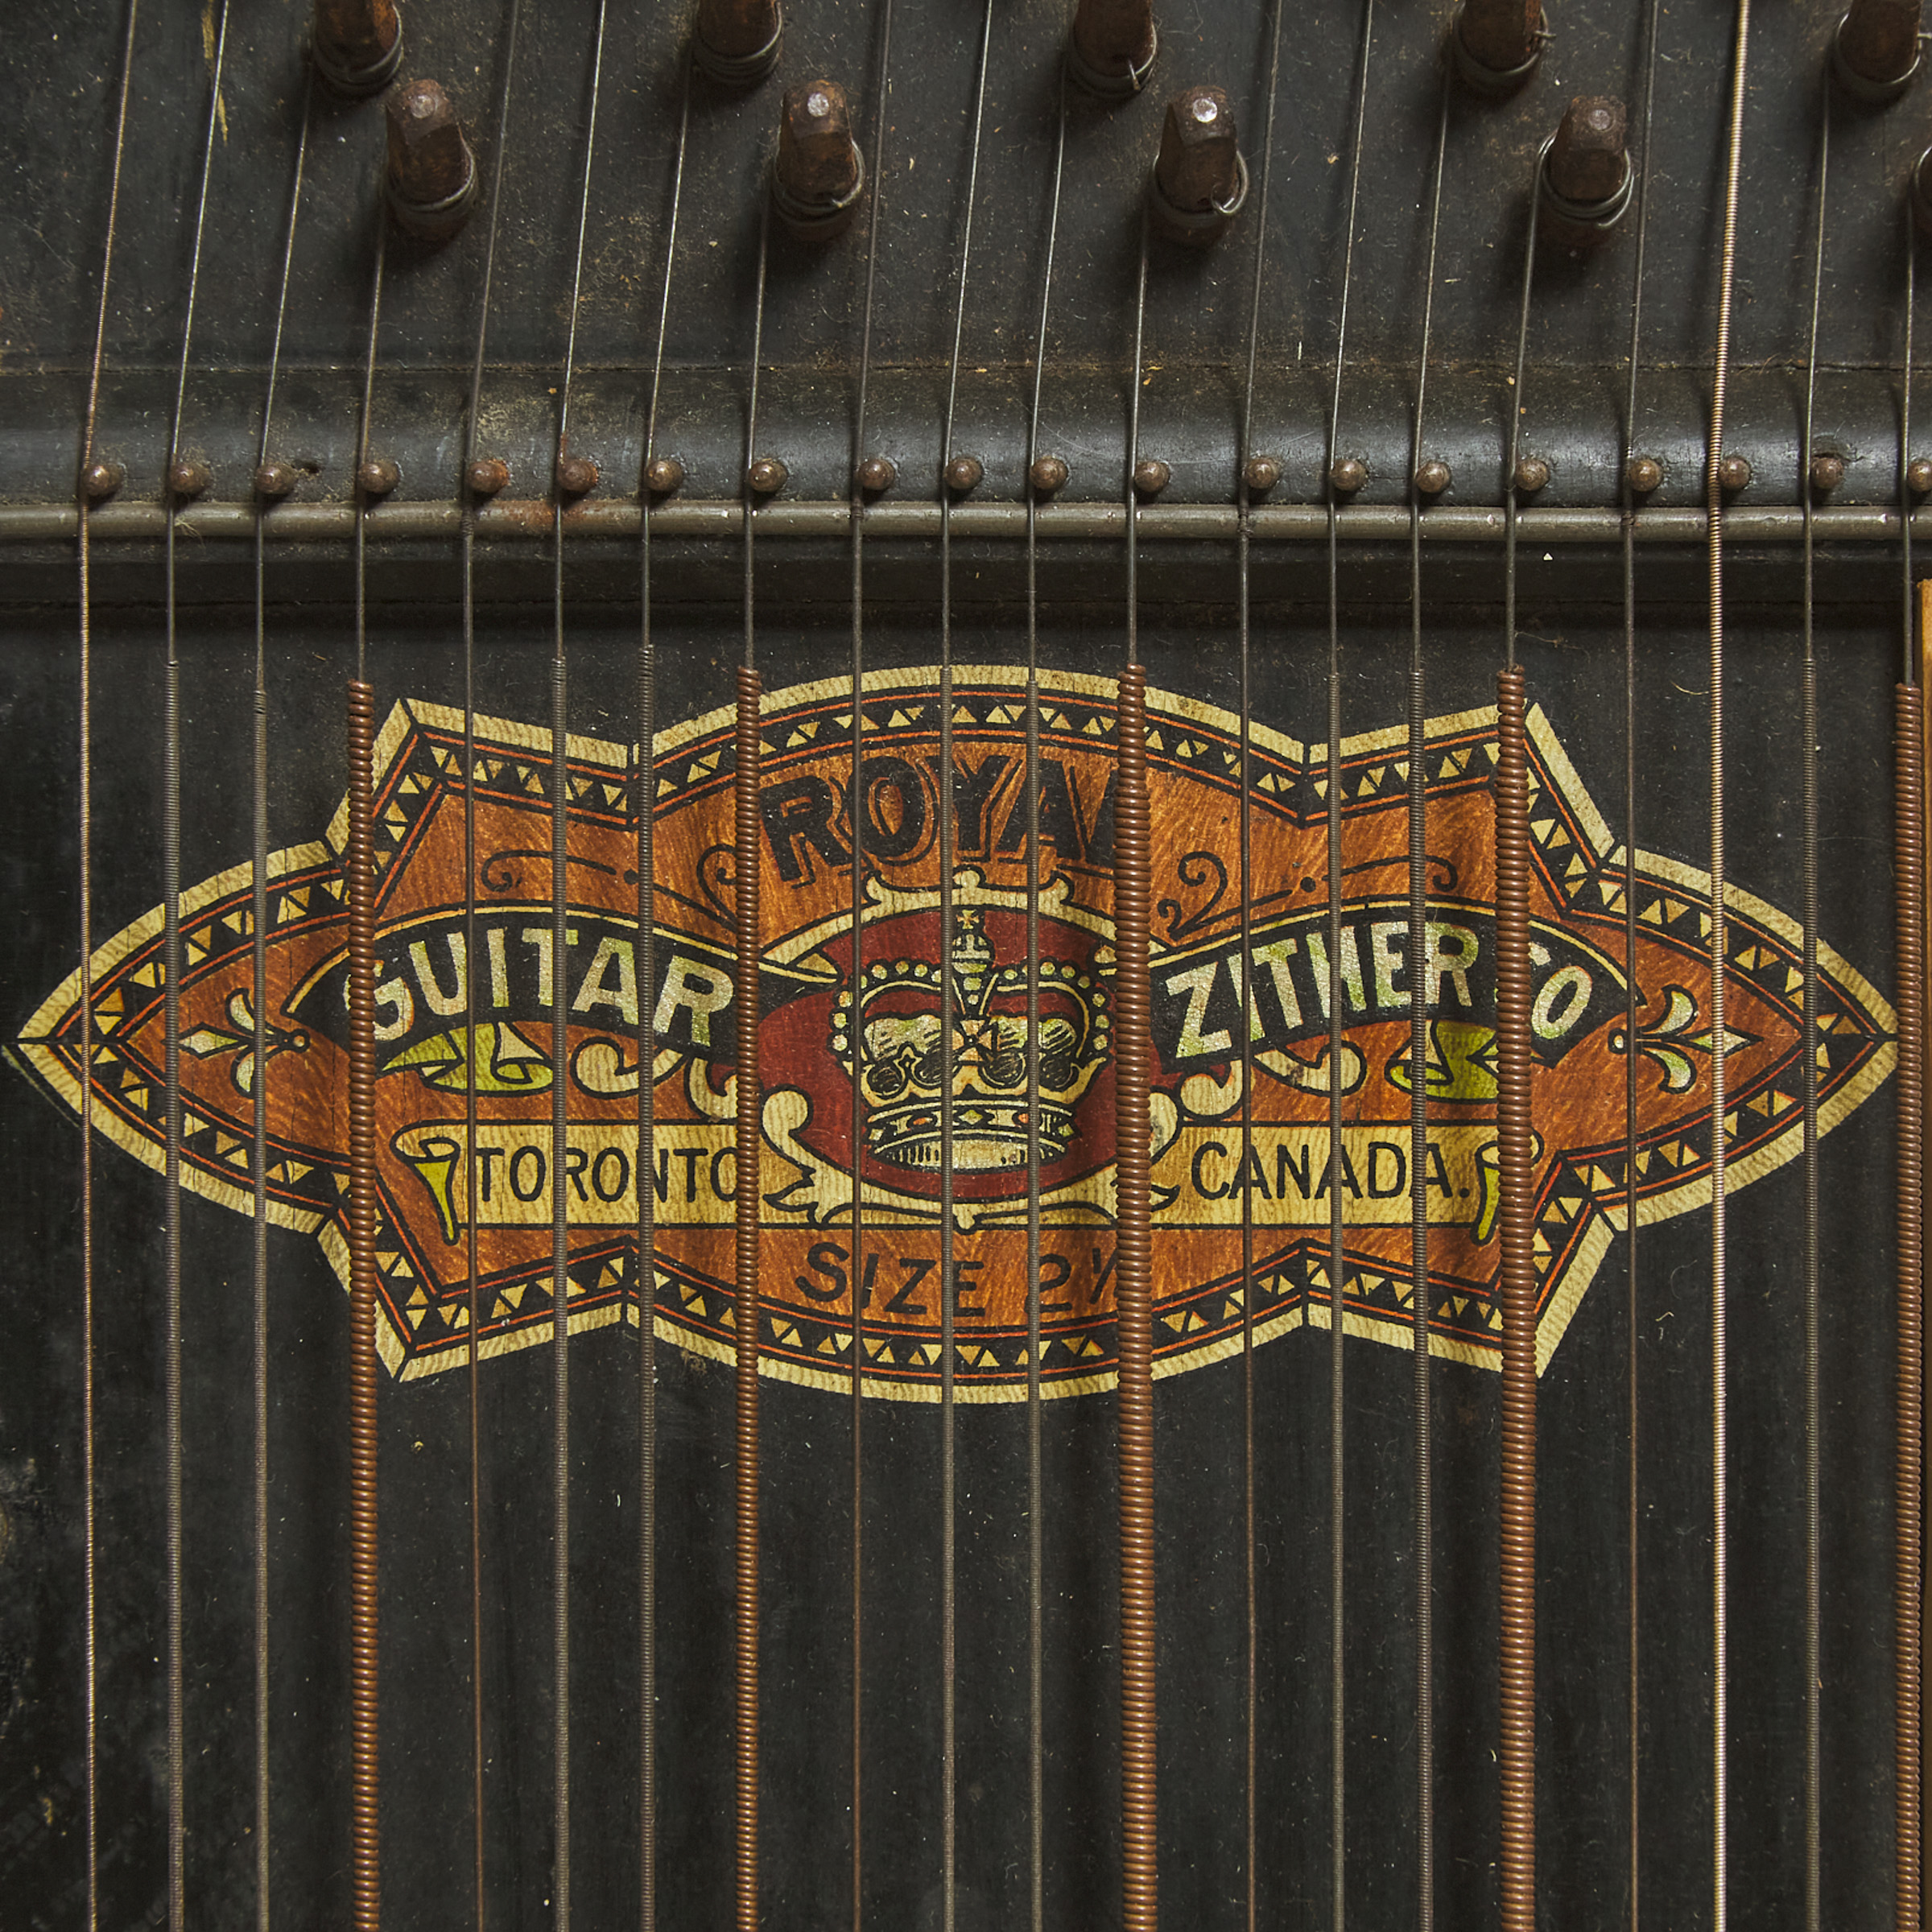 Royal Guitar Zither Company, Toronto, Canada, Zither, c.1900